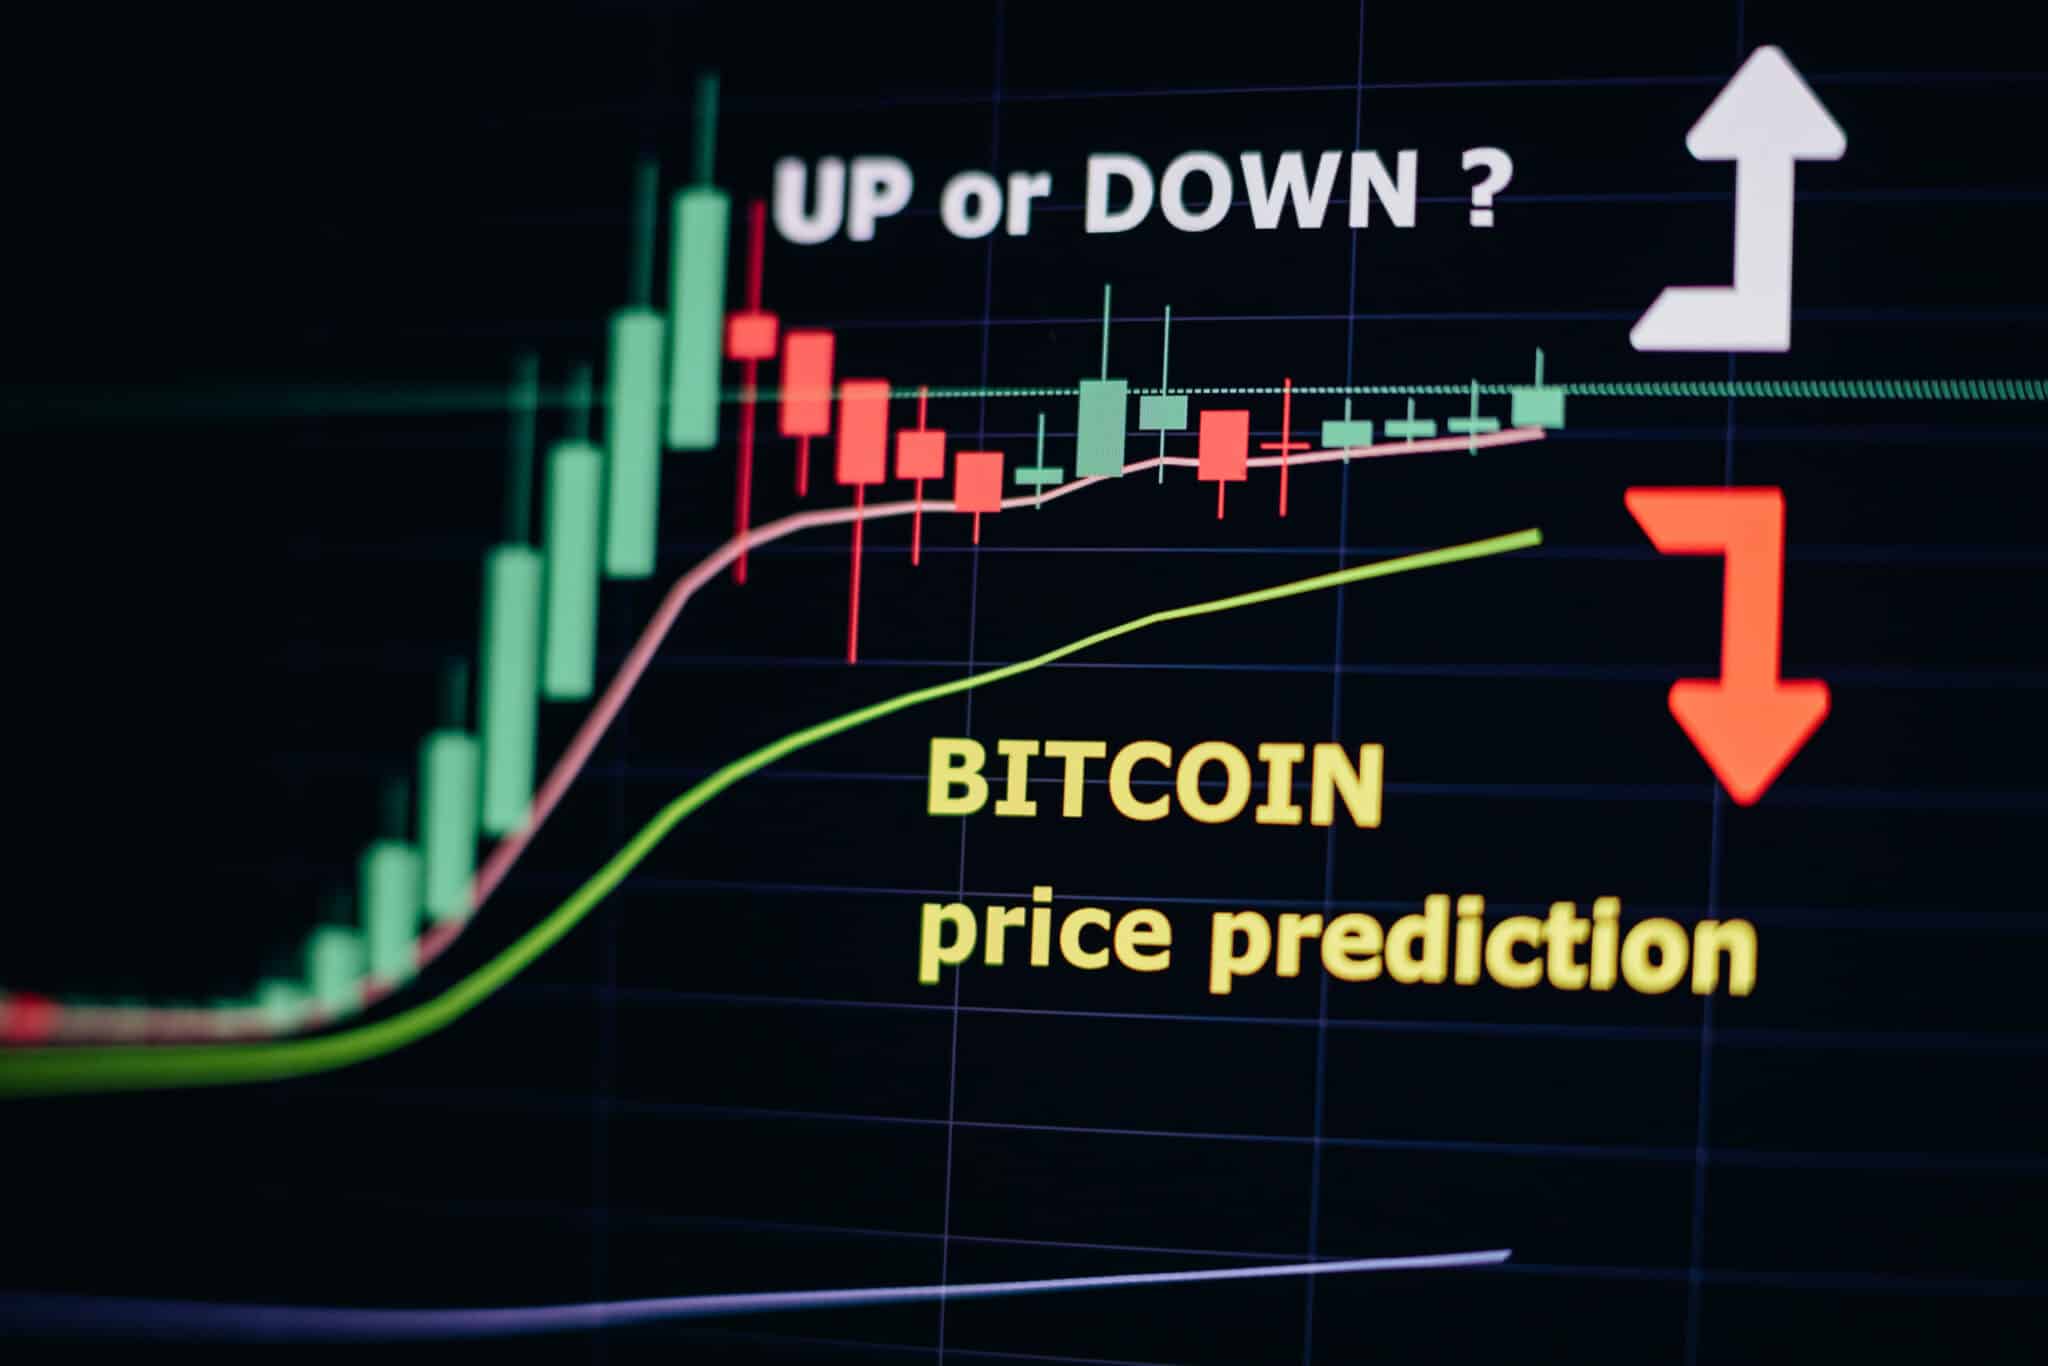 Today’s cryptocurrency prices: Bitcoin is down 2% amid significant volatility, while Ether is up 2%